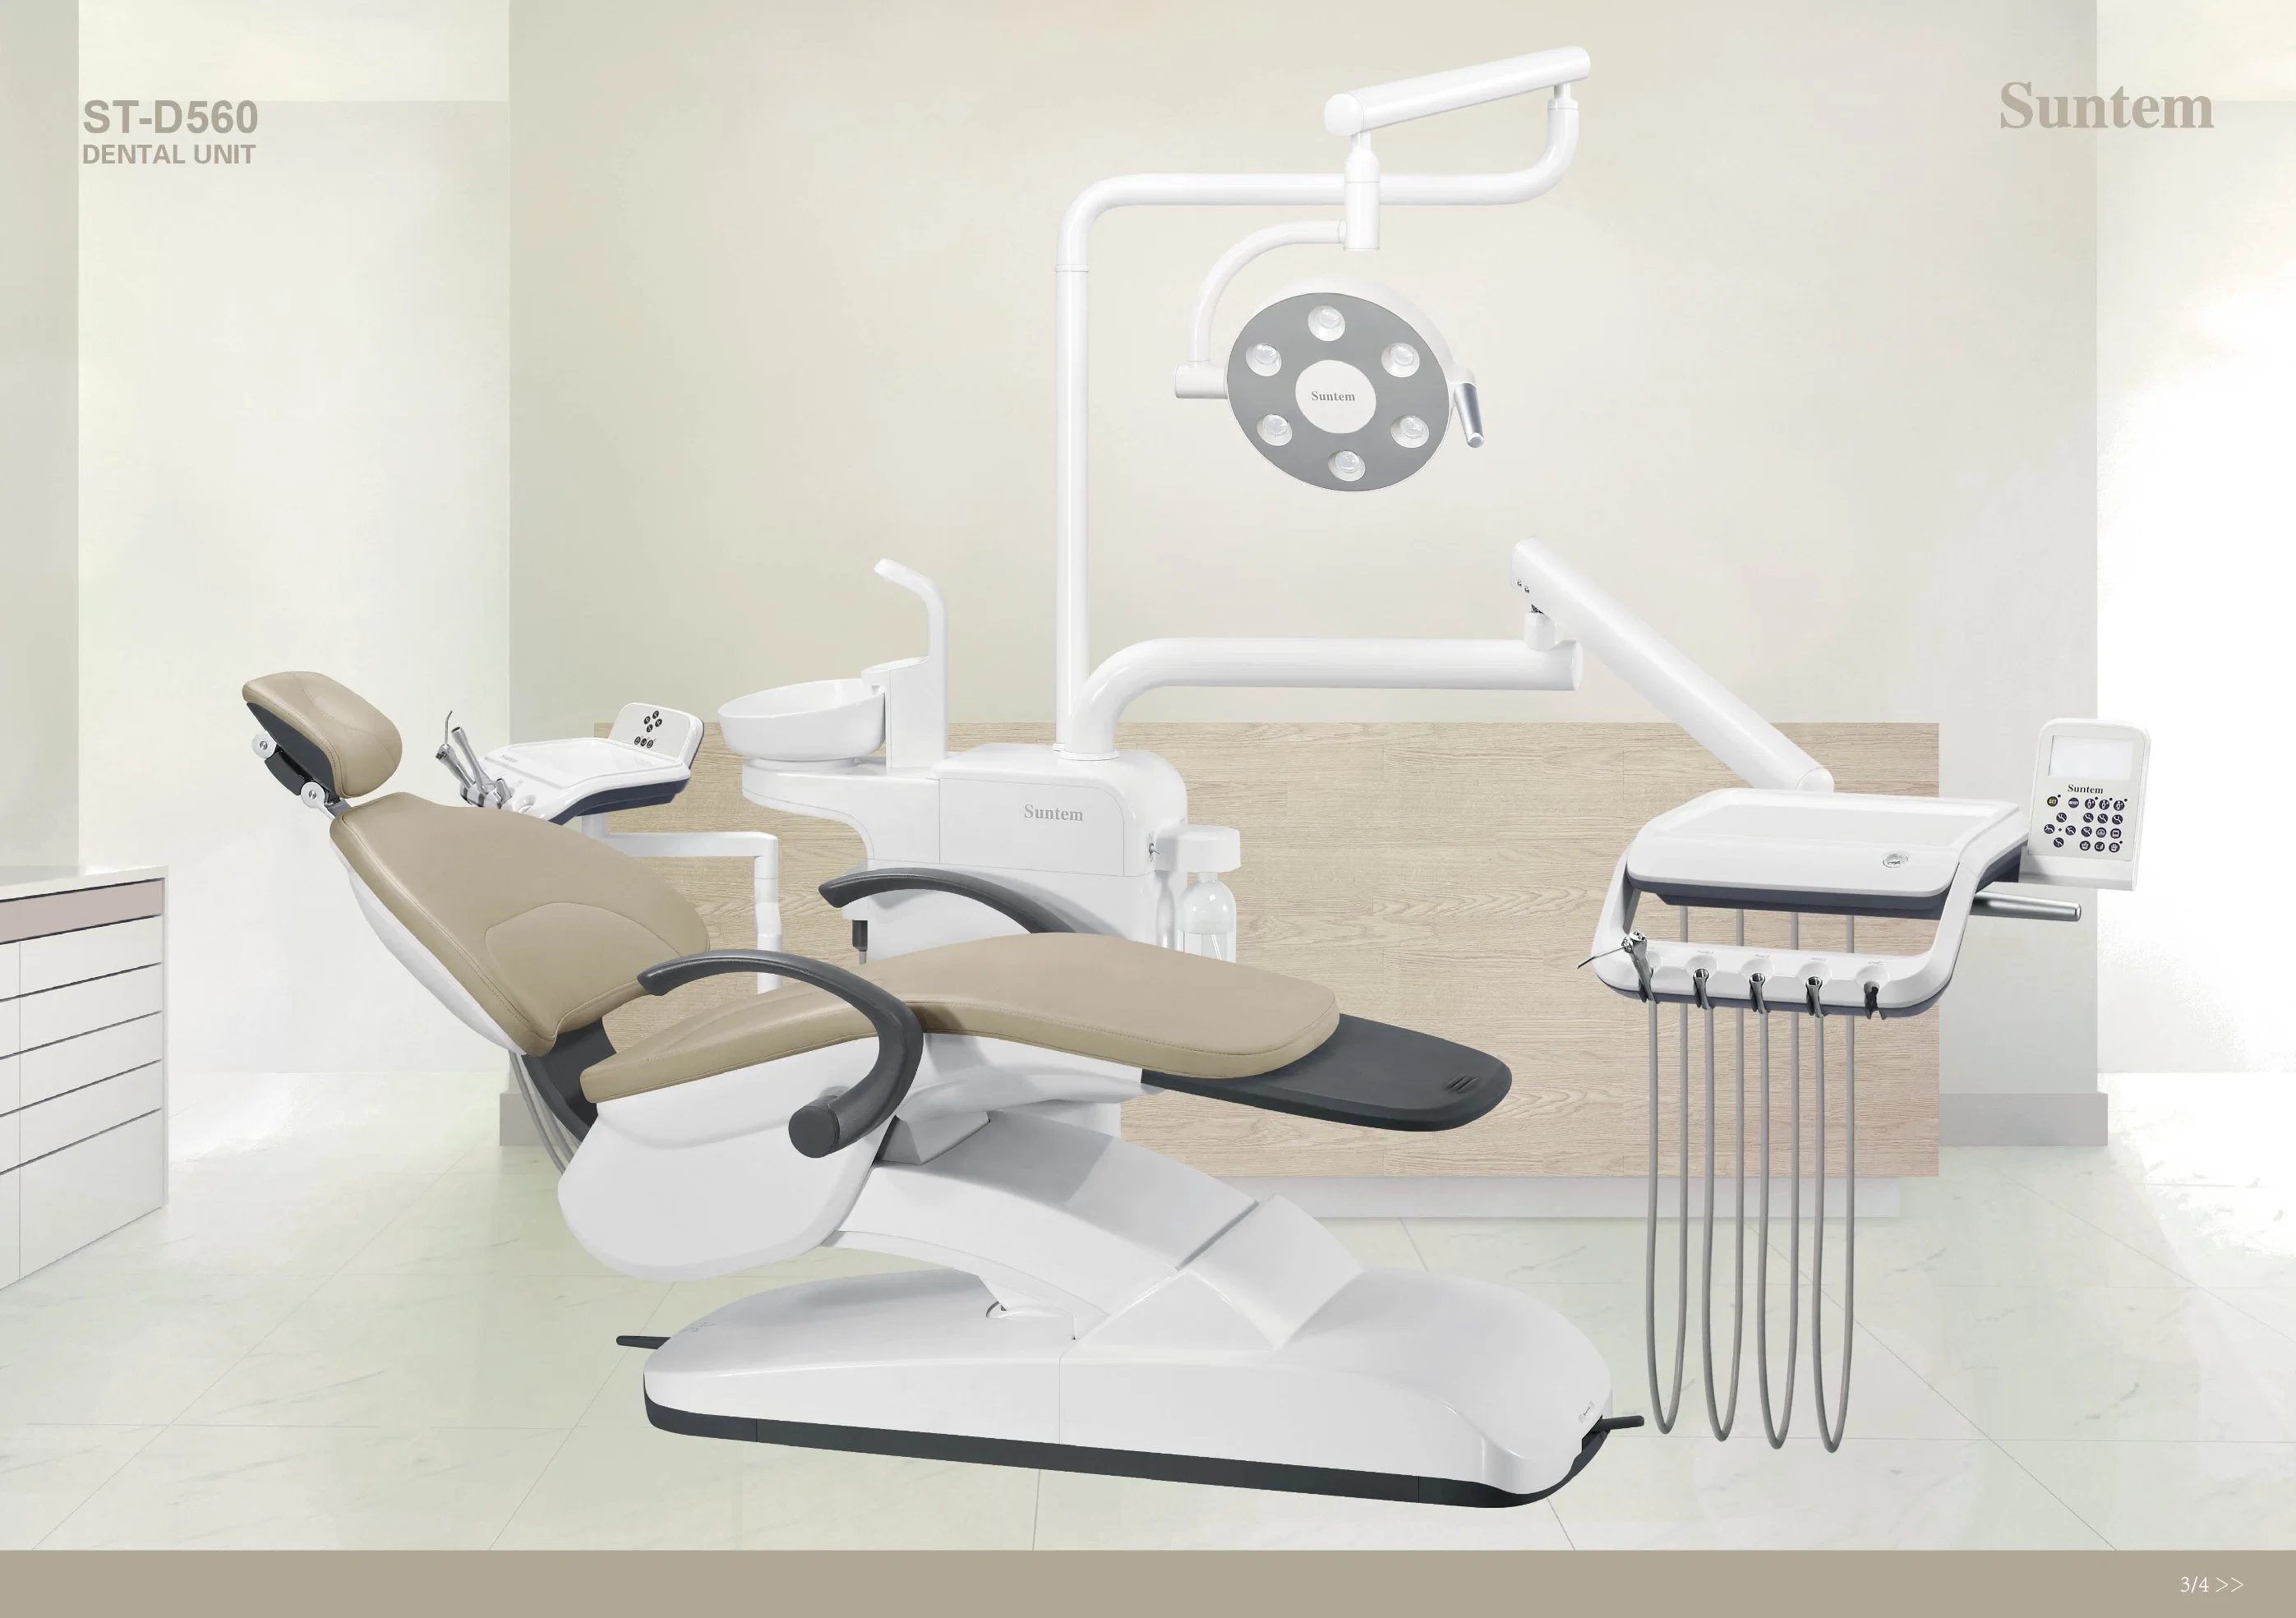 Suntem Dental Unit St-D560 with European Design/Dental Chair/Low-Mounted/Safety/Disinfection/CE Approved